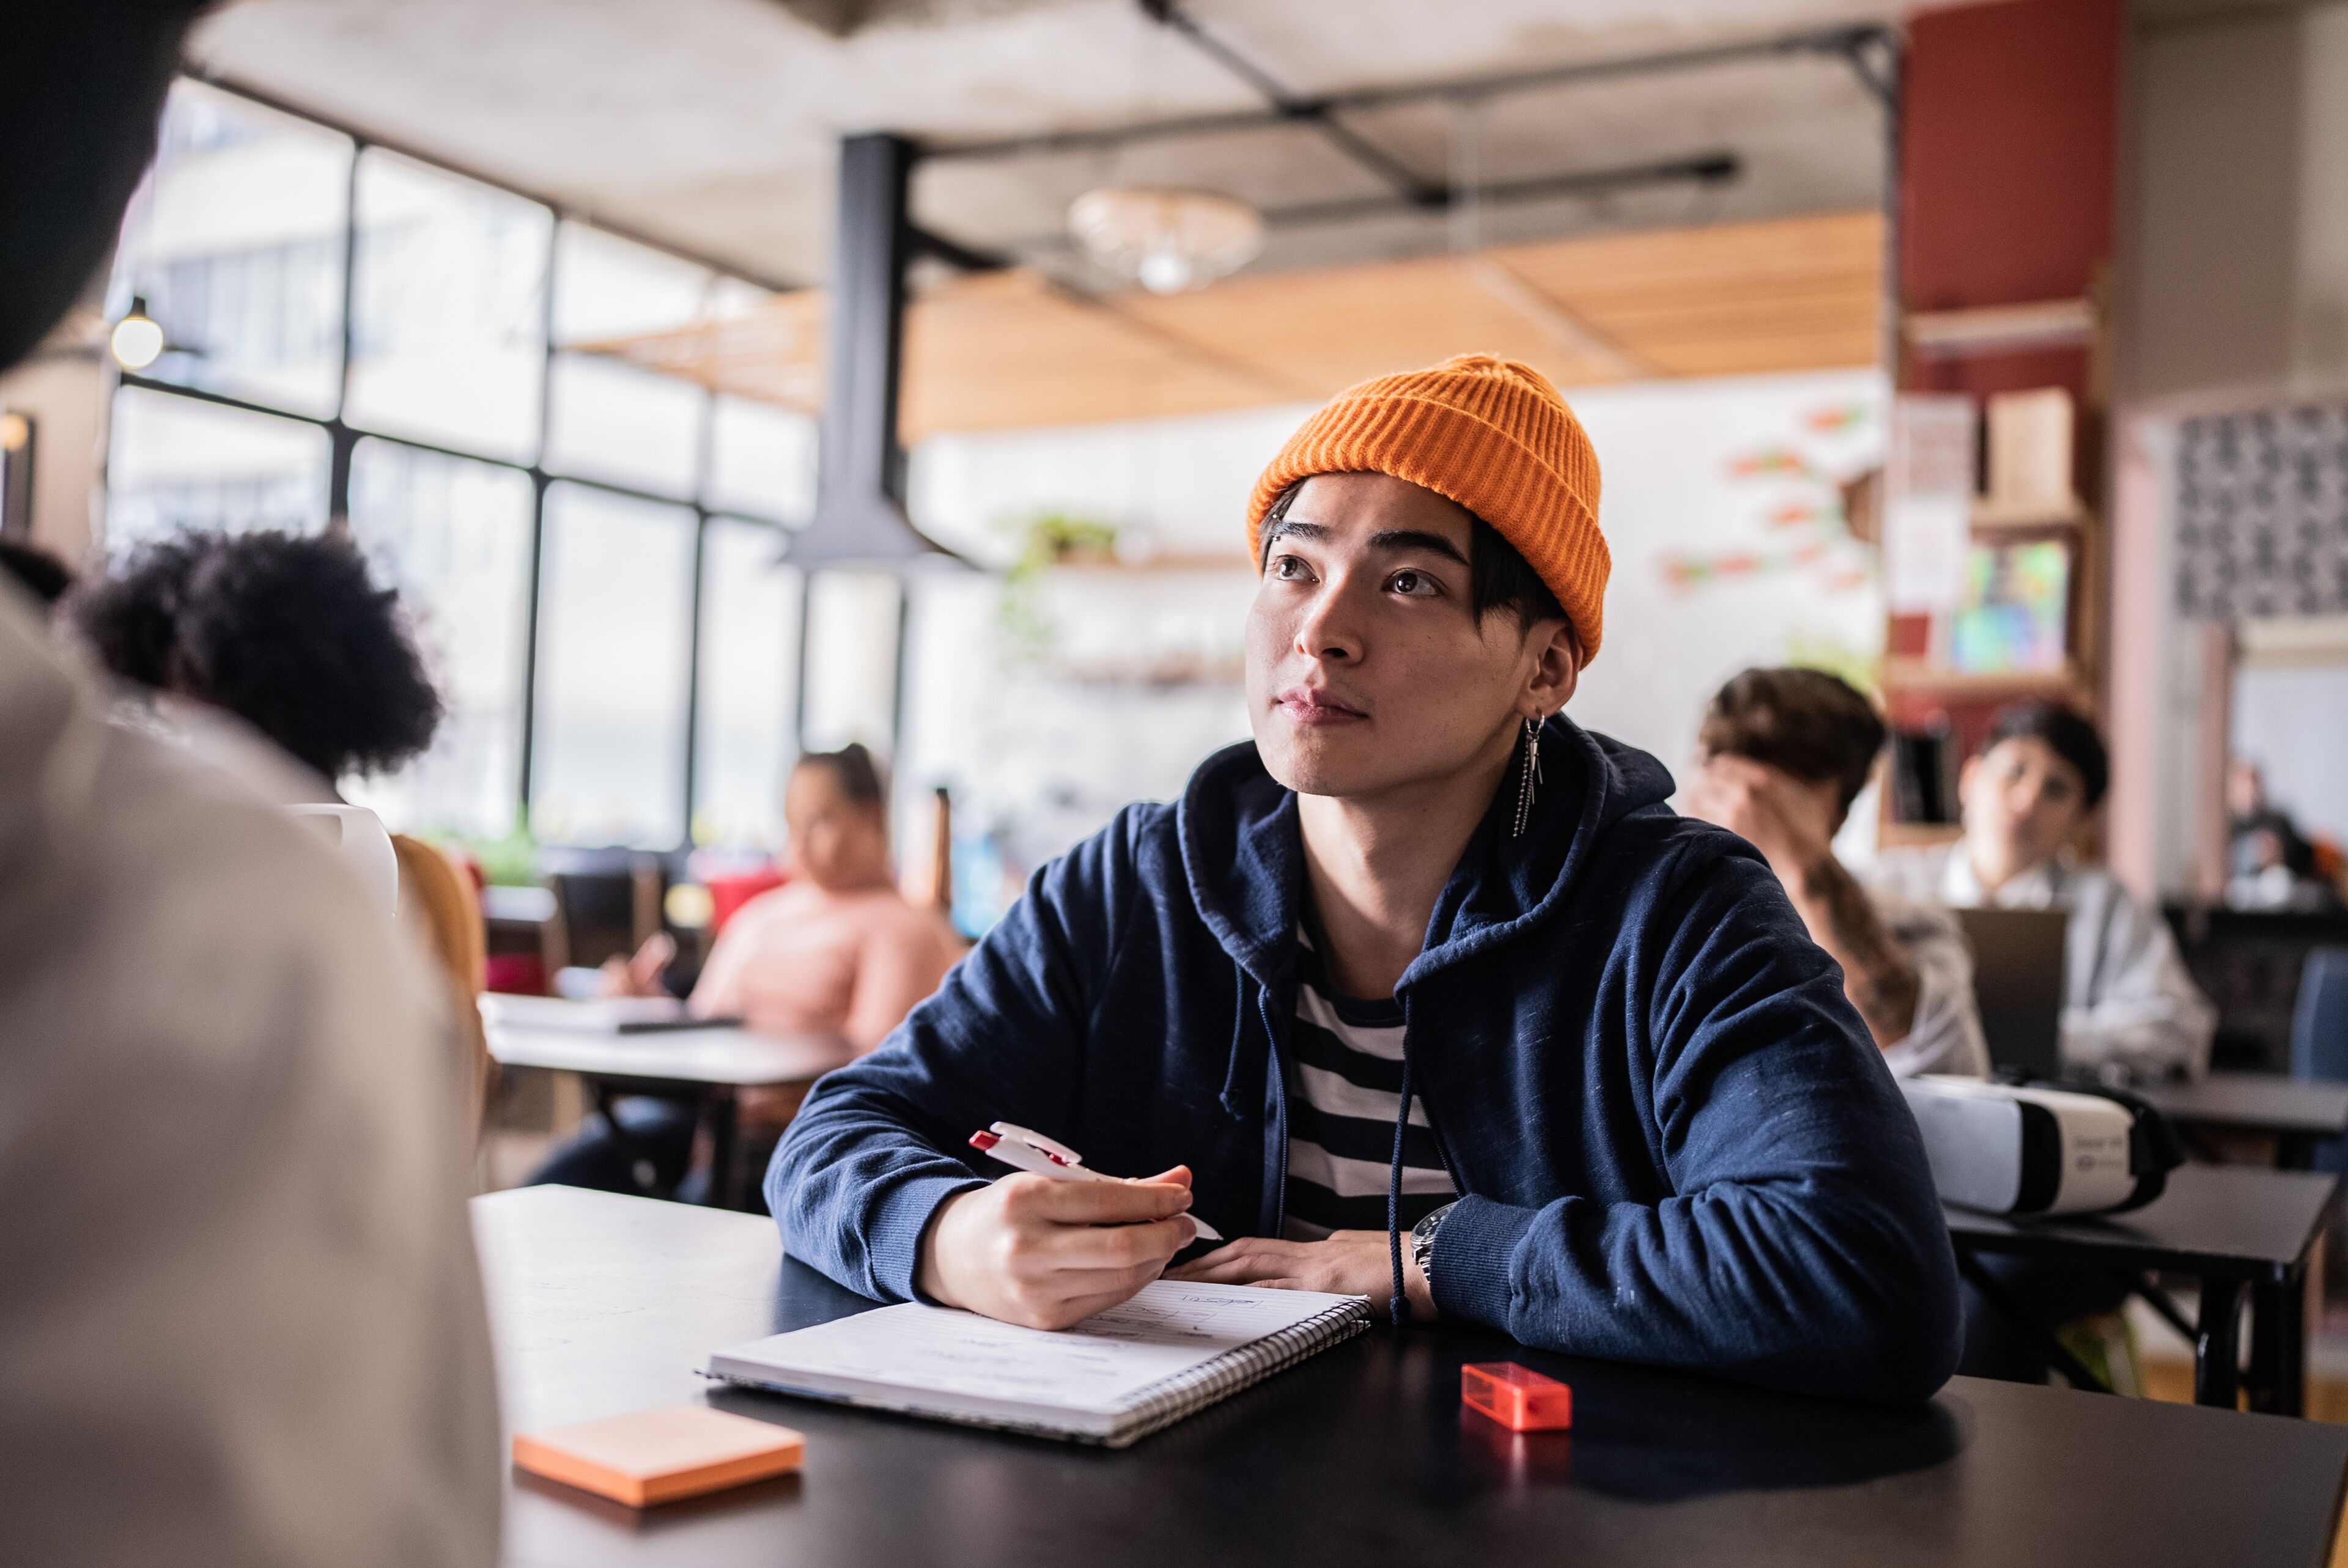  A focused young adult in a beanie and hoodie sits in a classroom setting, pen in hand, attentively listening.